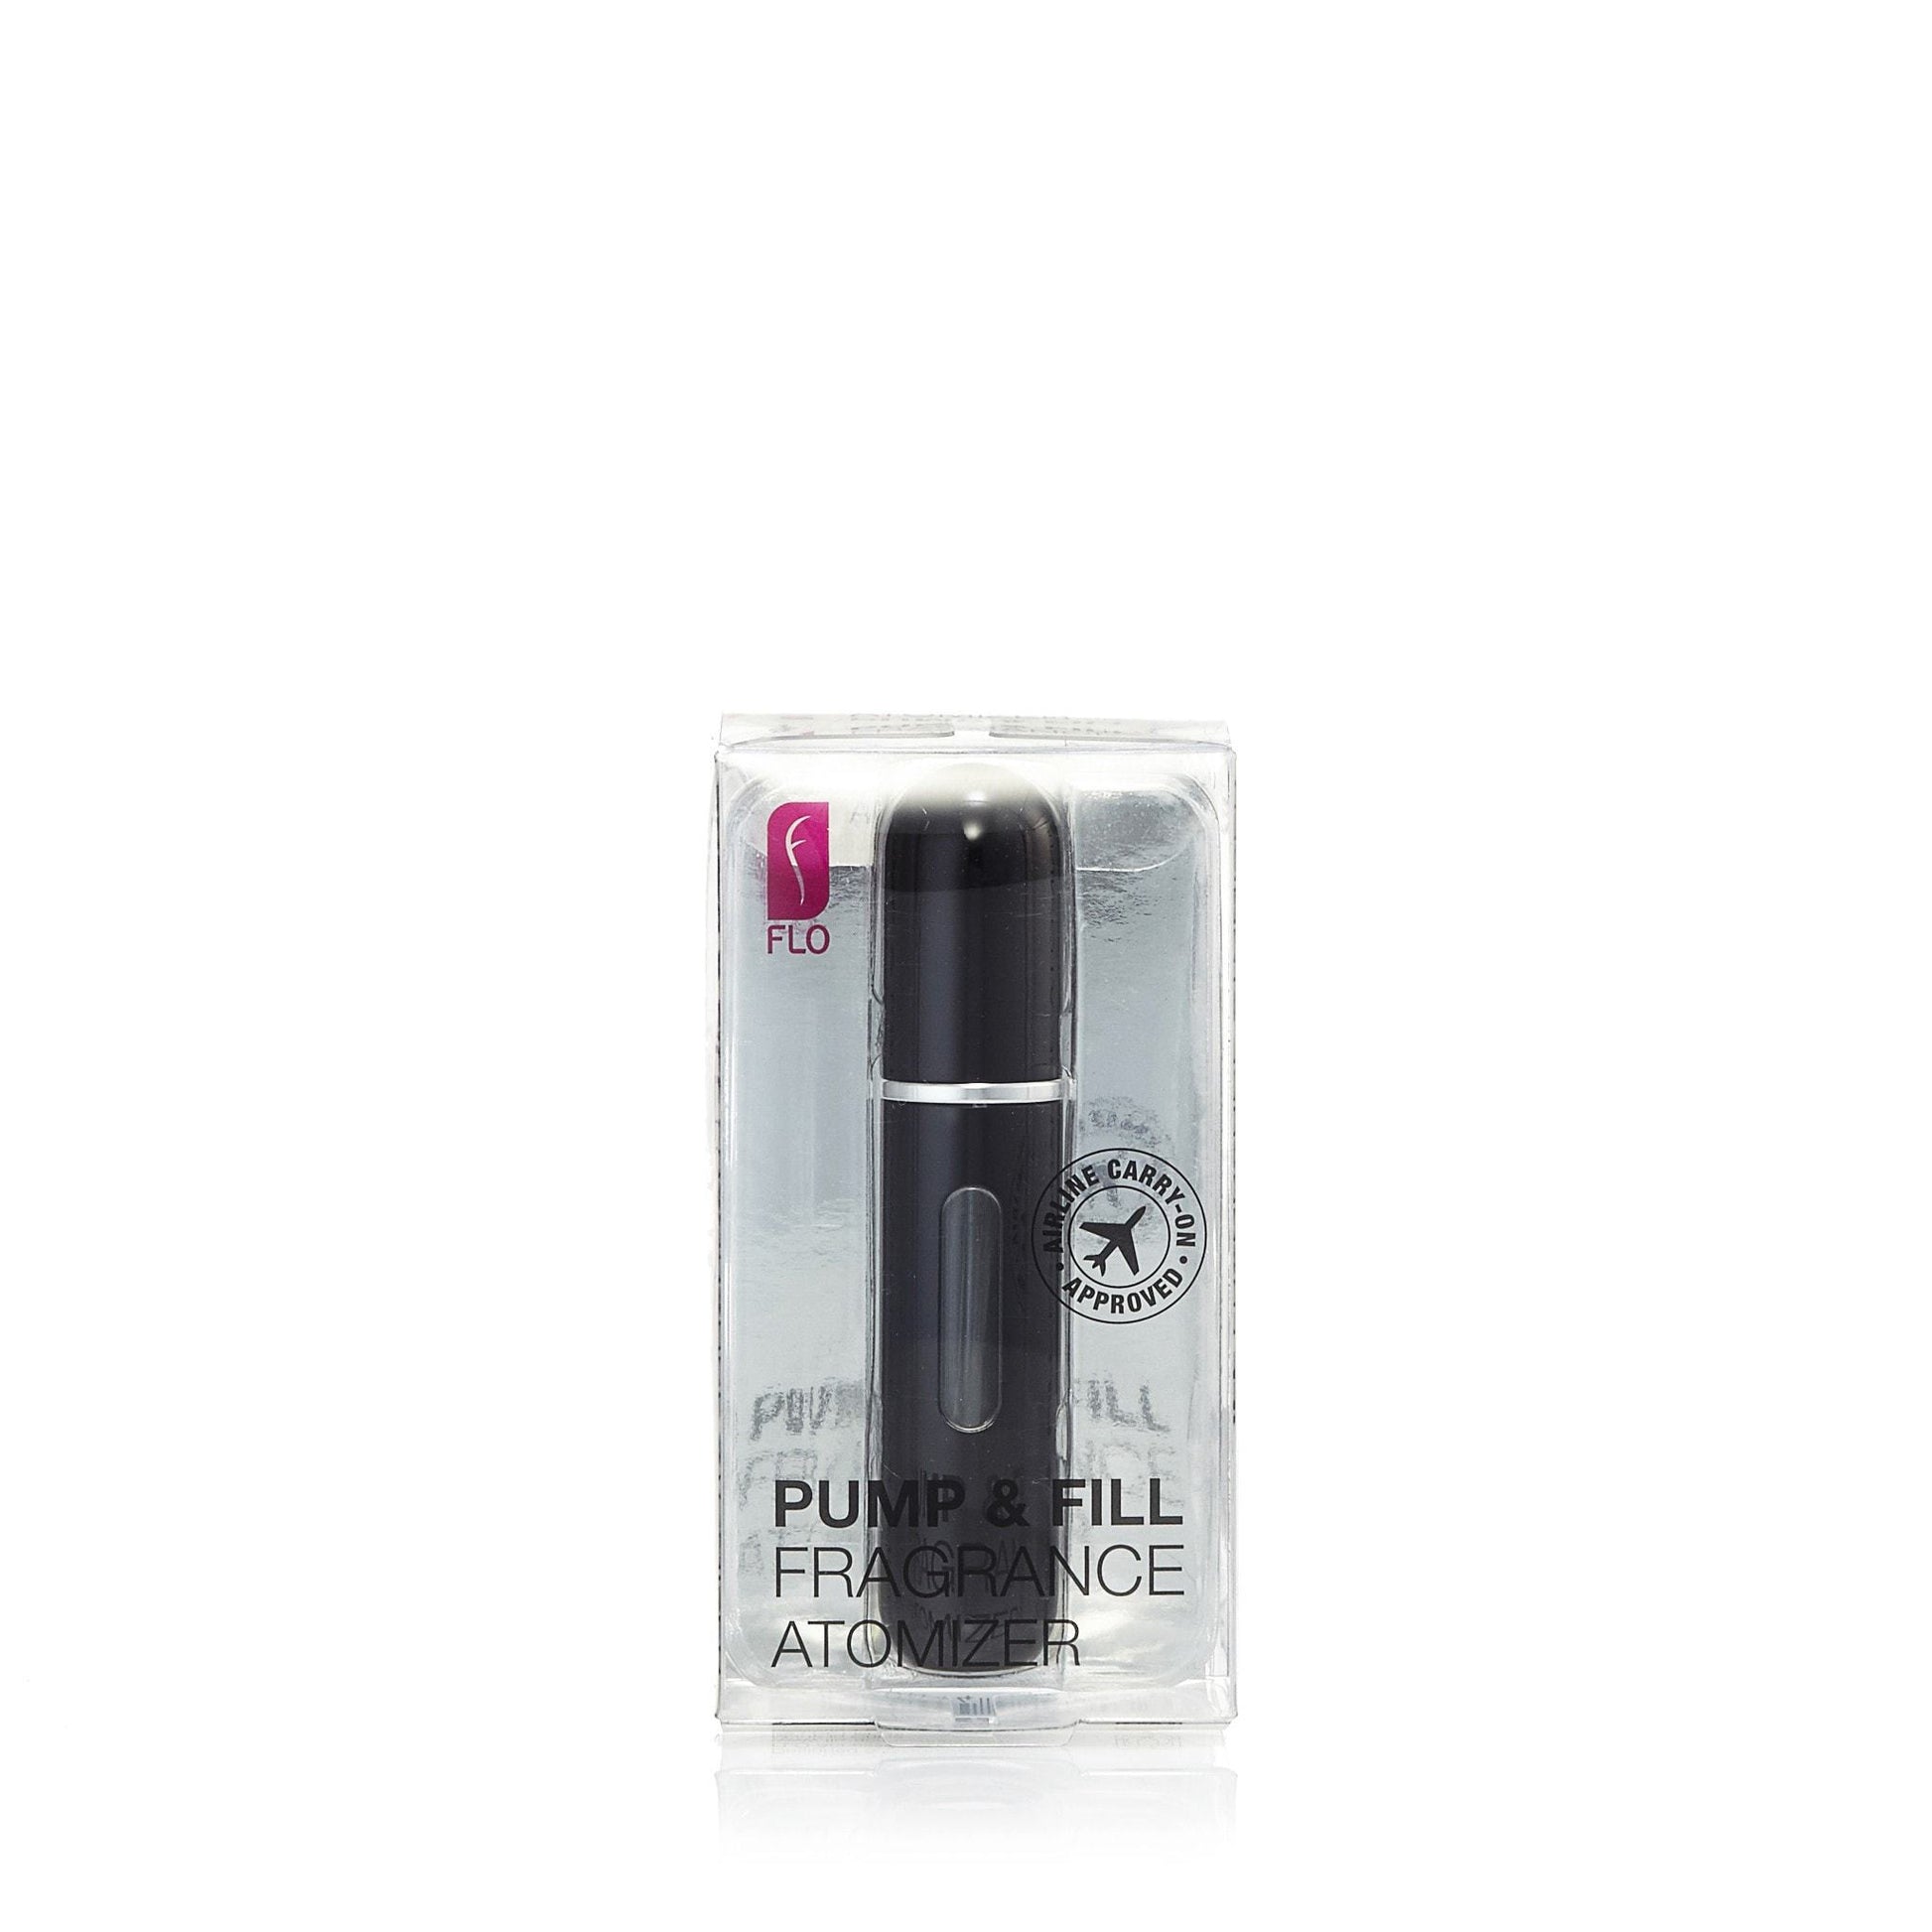 Pump and Fill Fragrance Atomizer by Flo, Product image 6